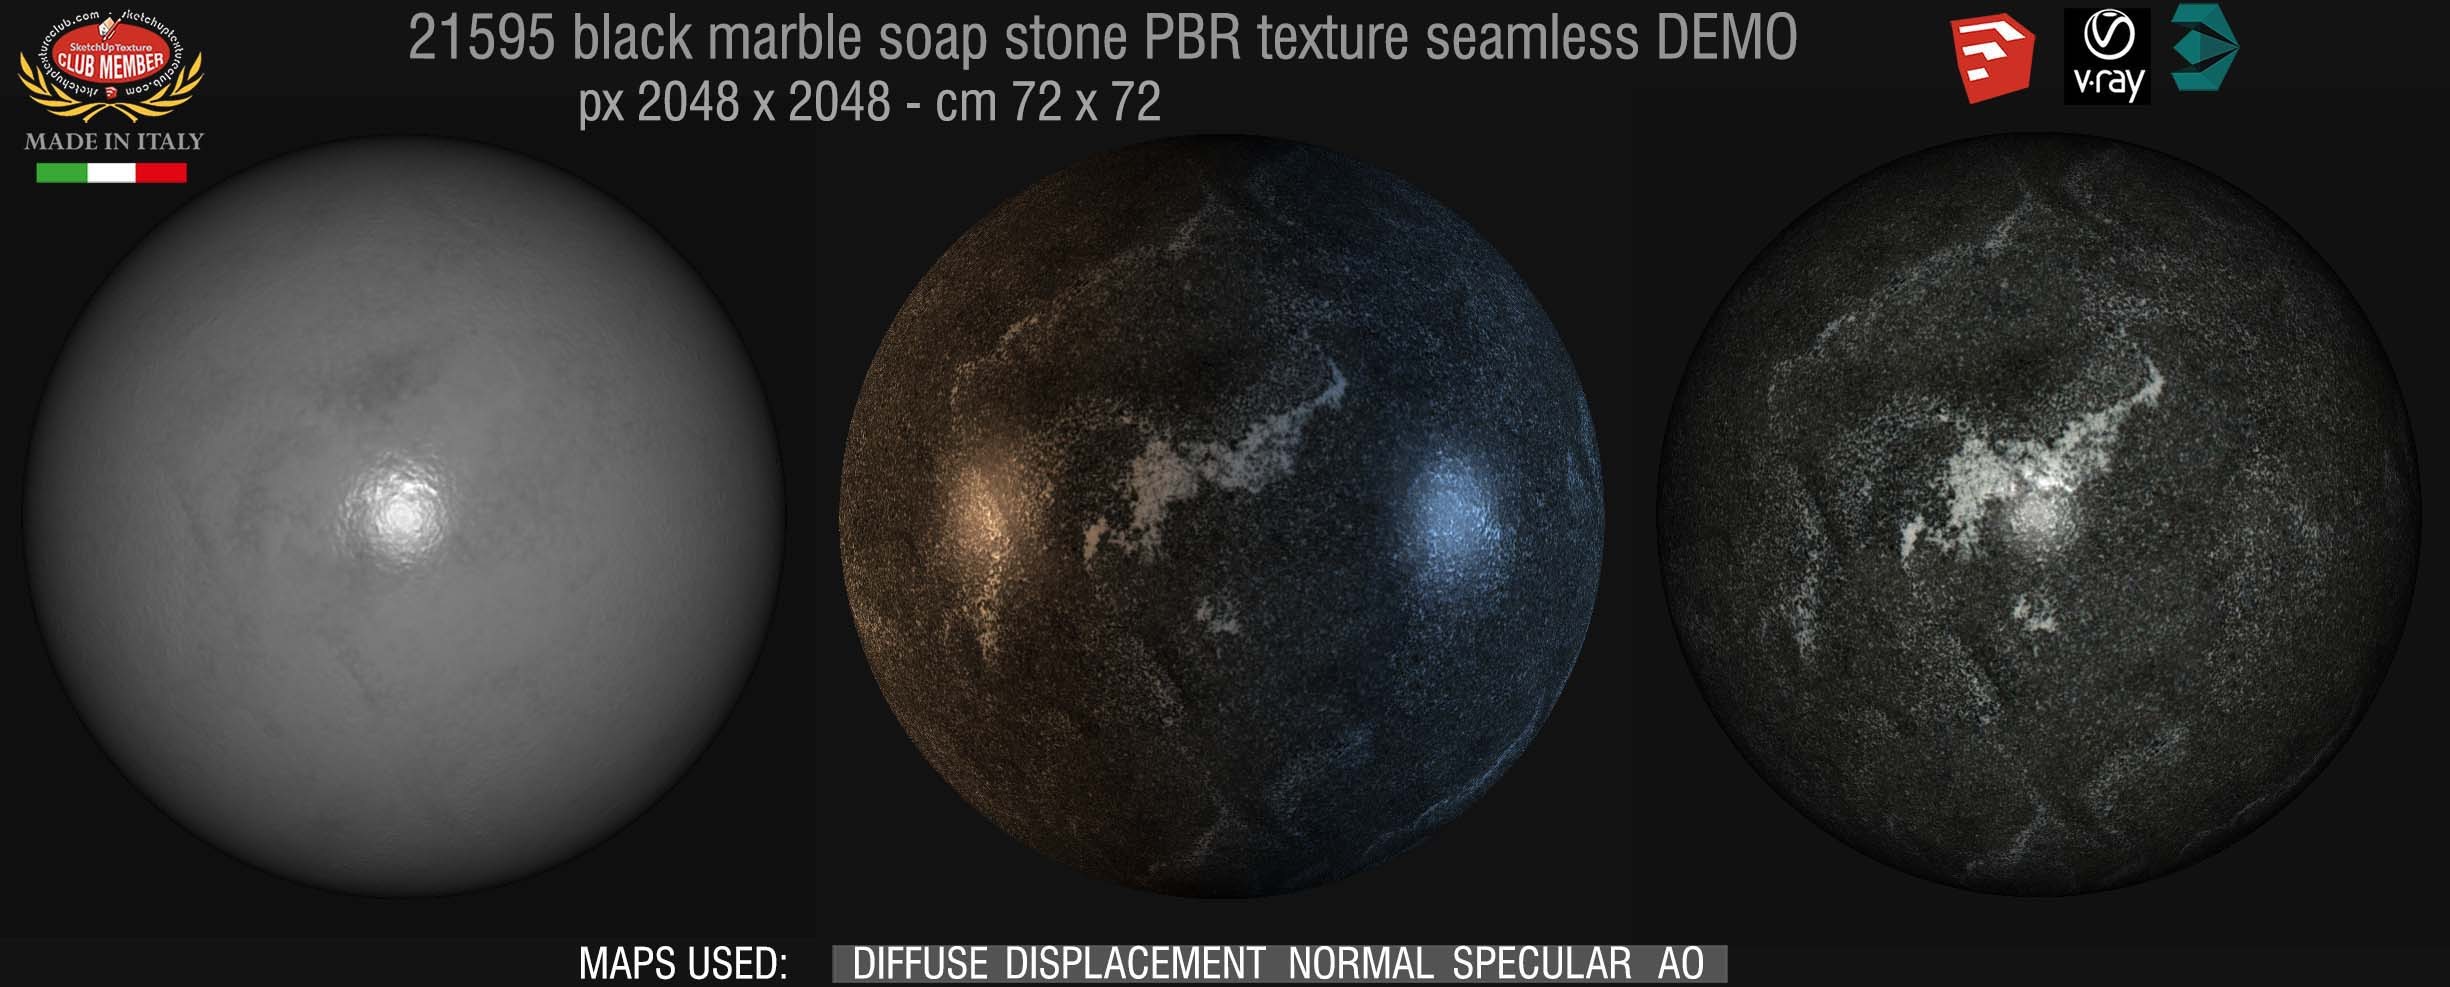 21595 black marble soap stone PBR texture seamless DEMO